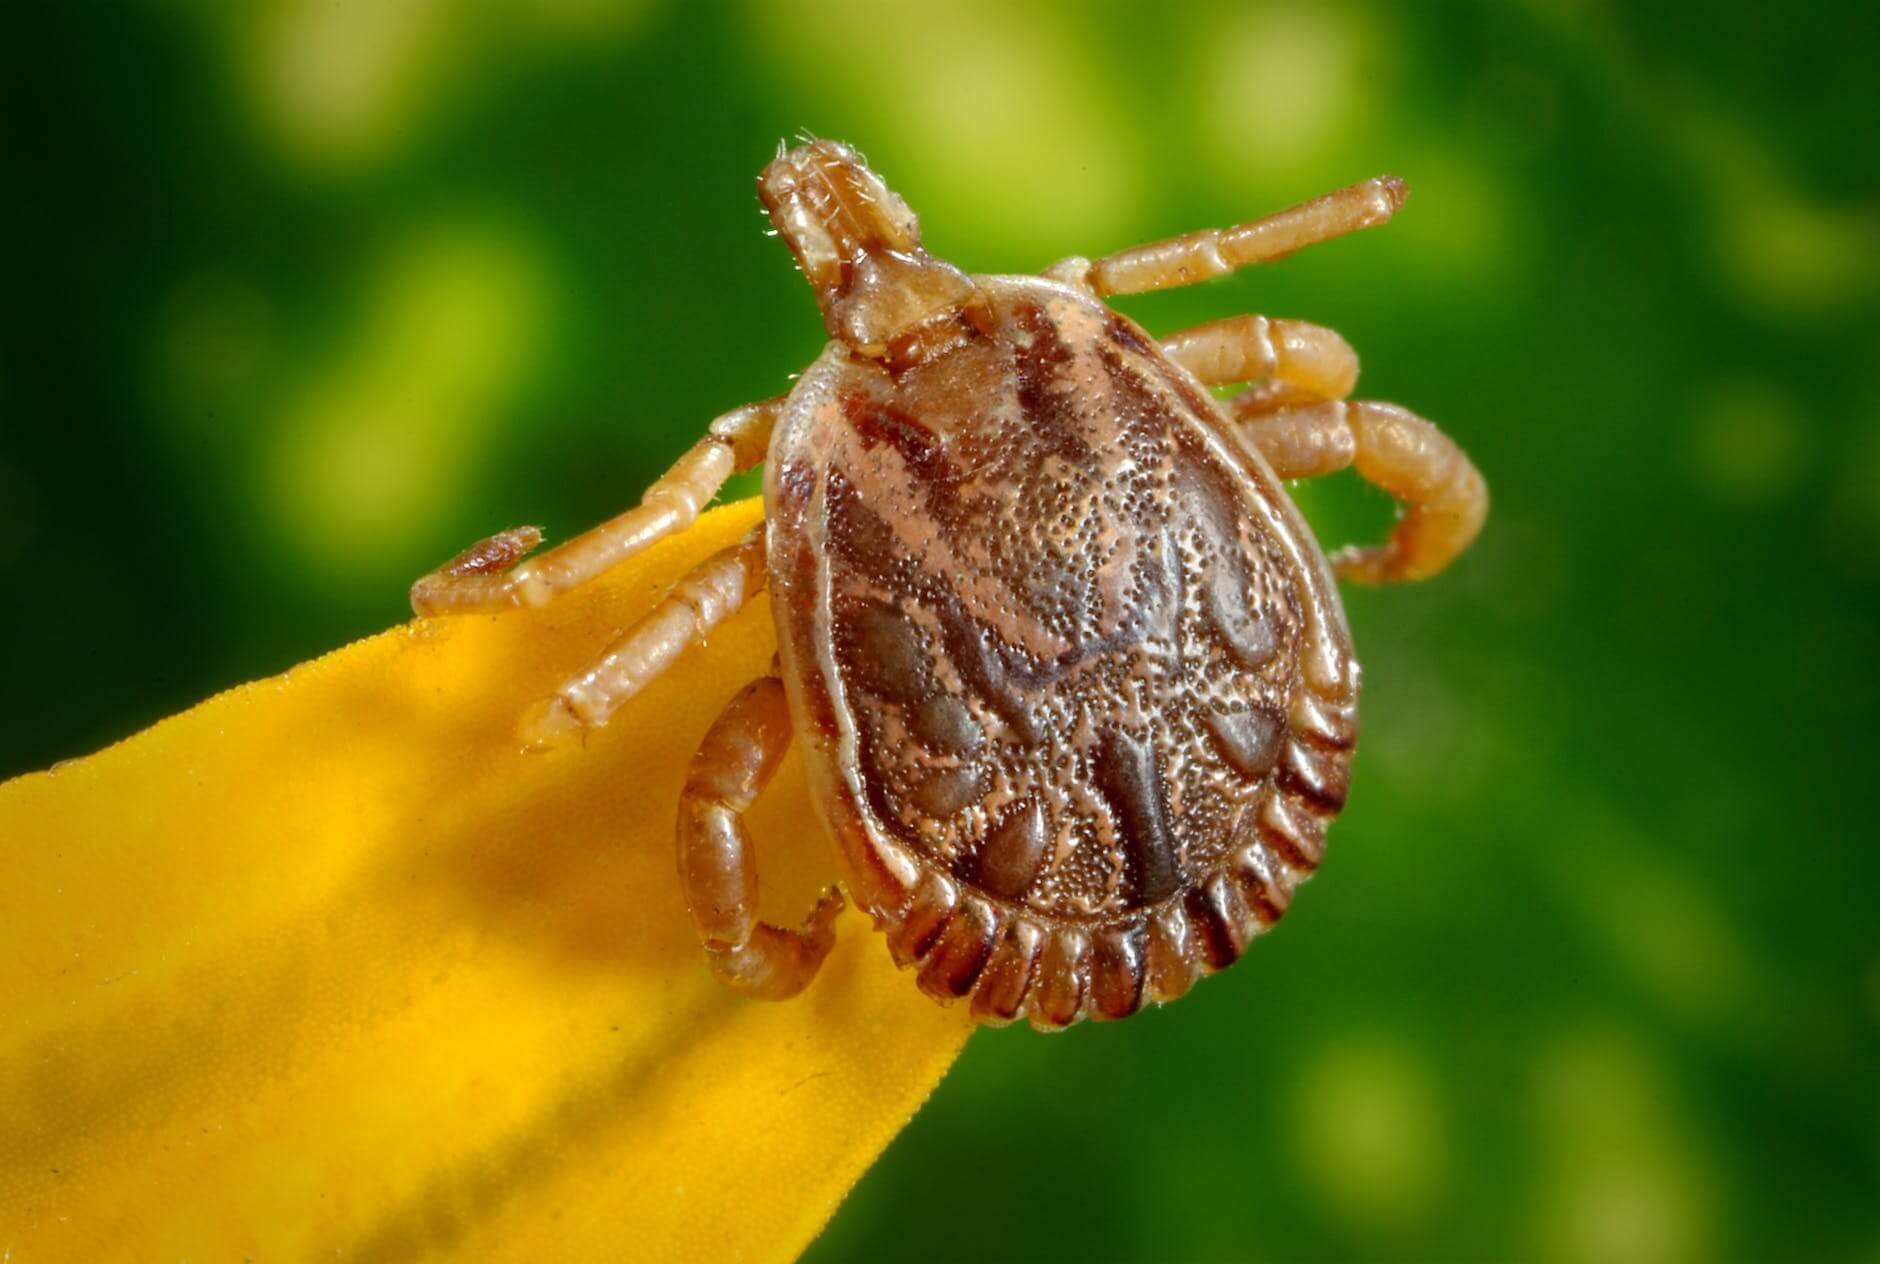 Scientist, Health Director Warning About New Tick Species, Diseases, Exploding Populations